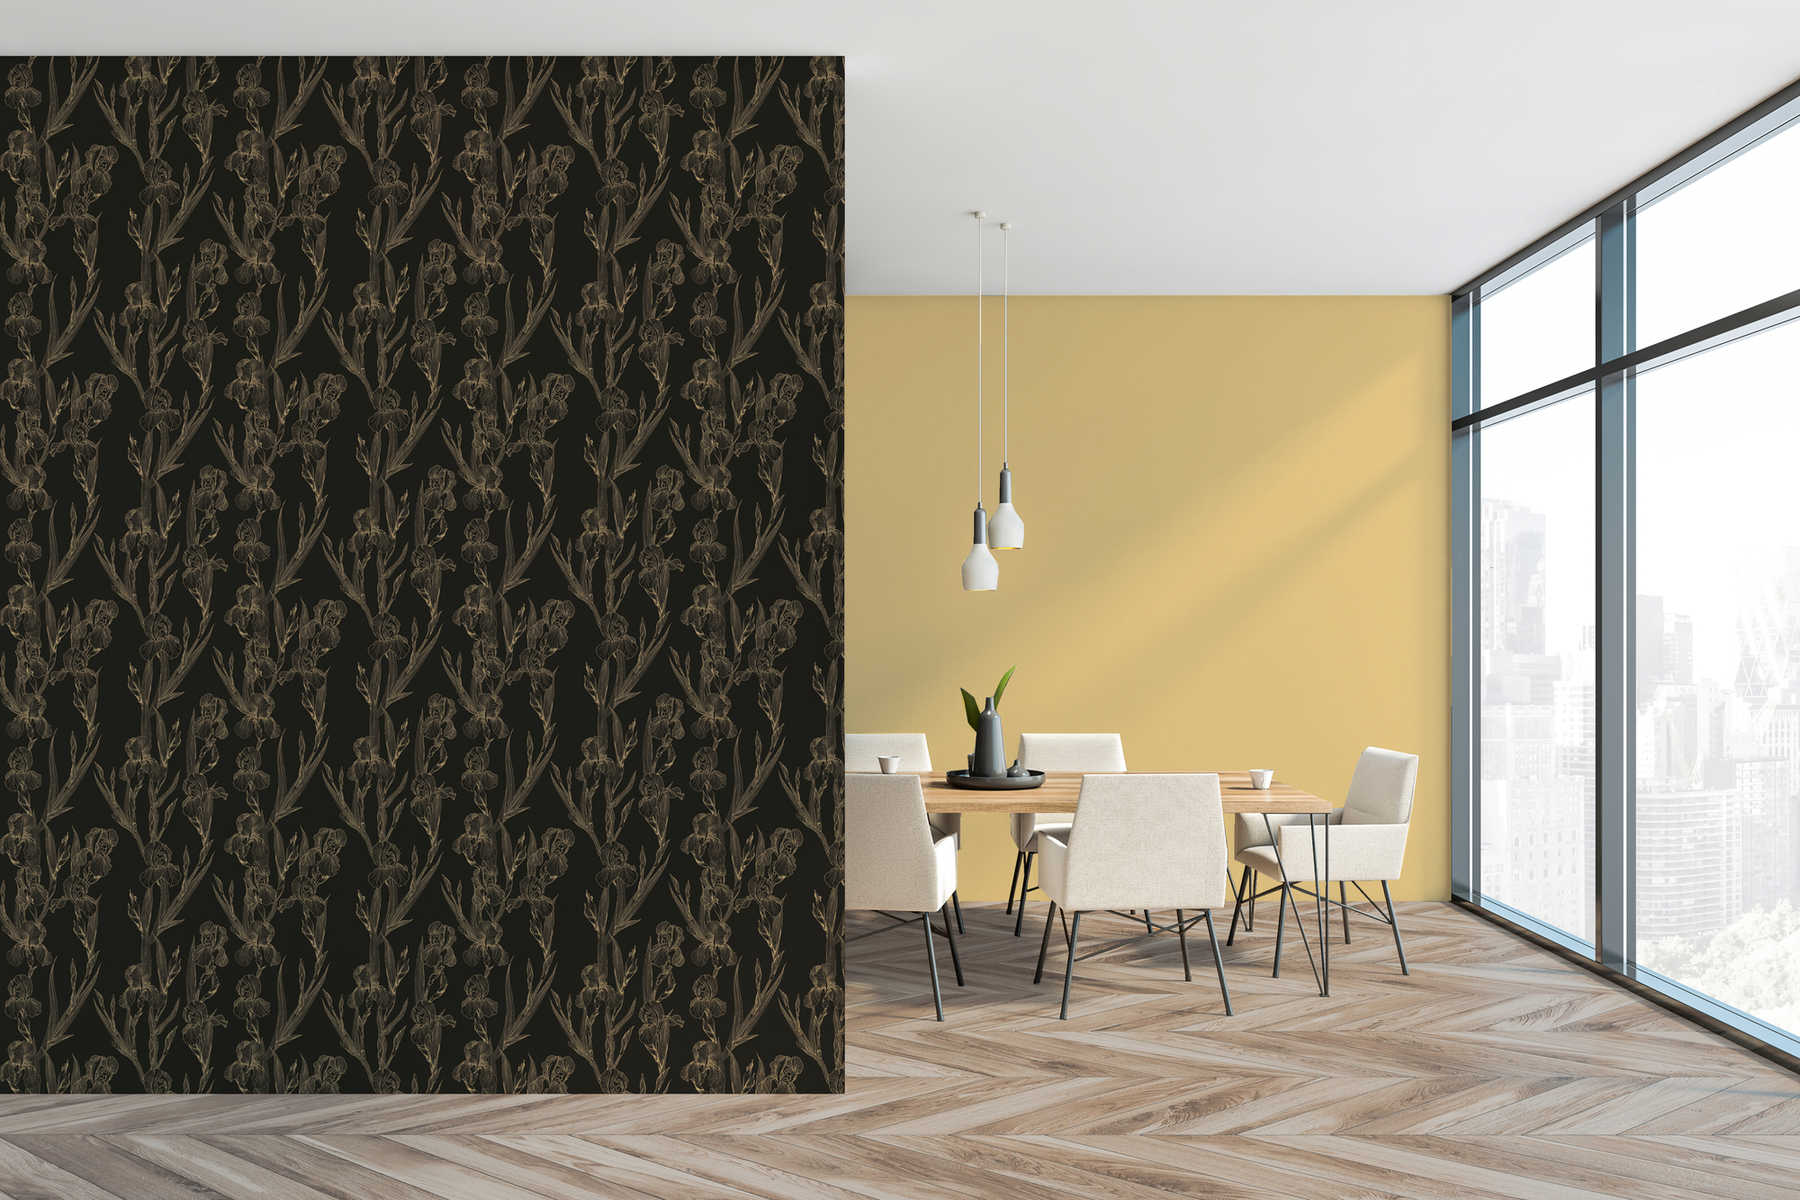             Floral pattern wallpaper with flowers in drawing style - black, yellow
        